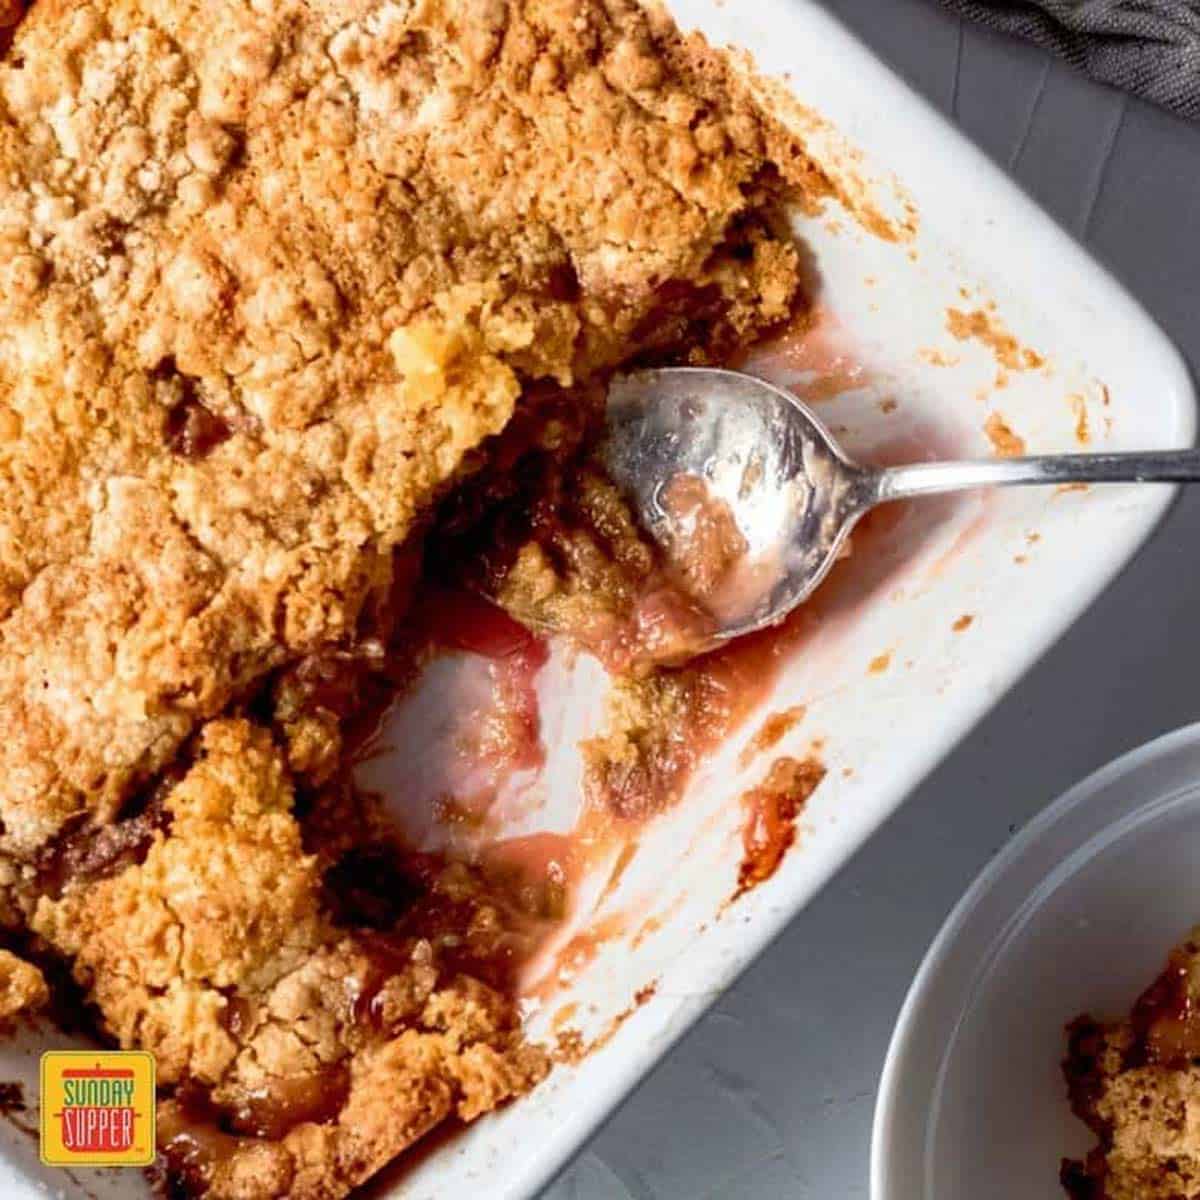 Rhubarb dump cake in a white dish with a serving spoon and a bowl of dump cake to the side